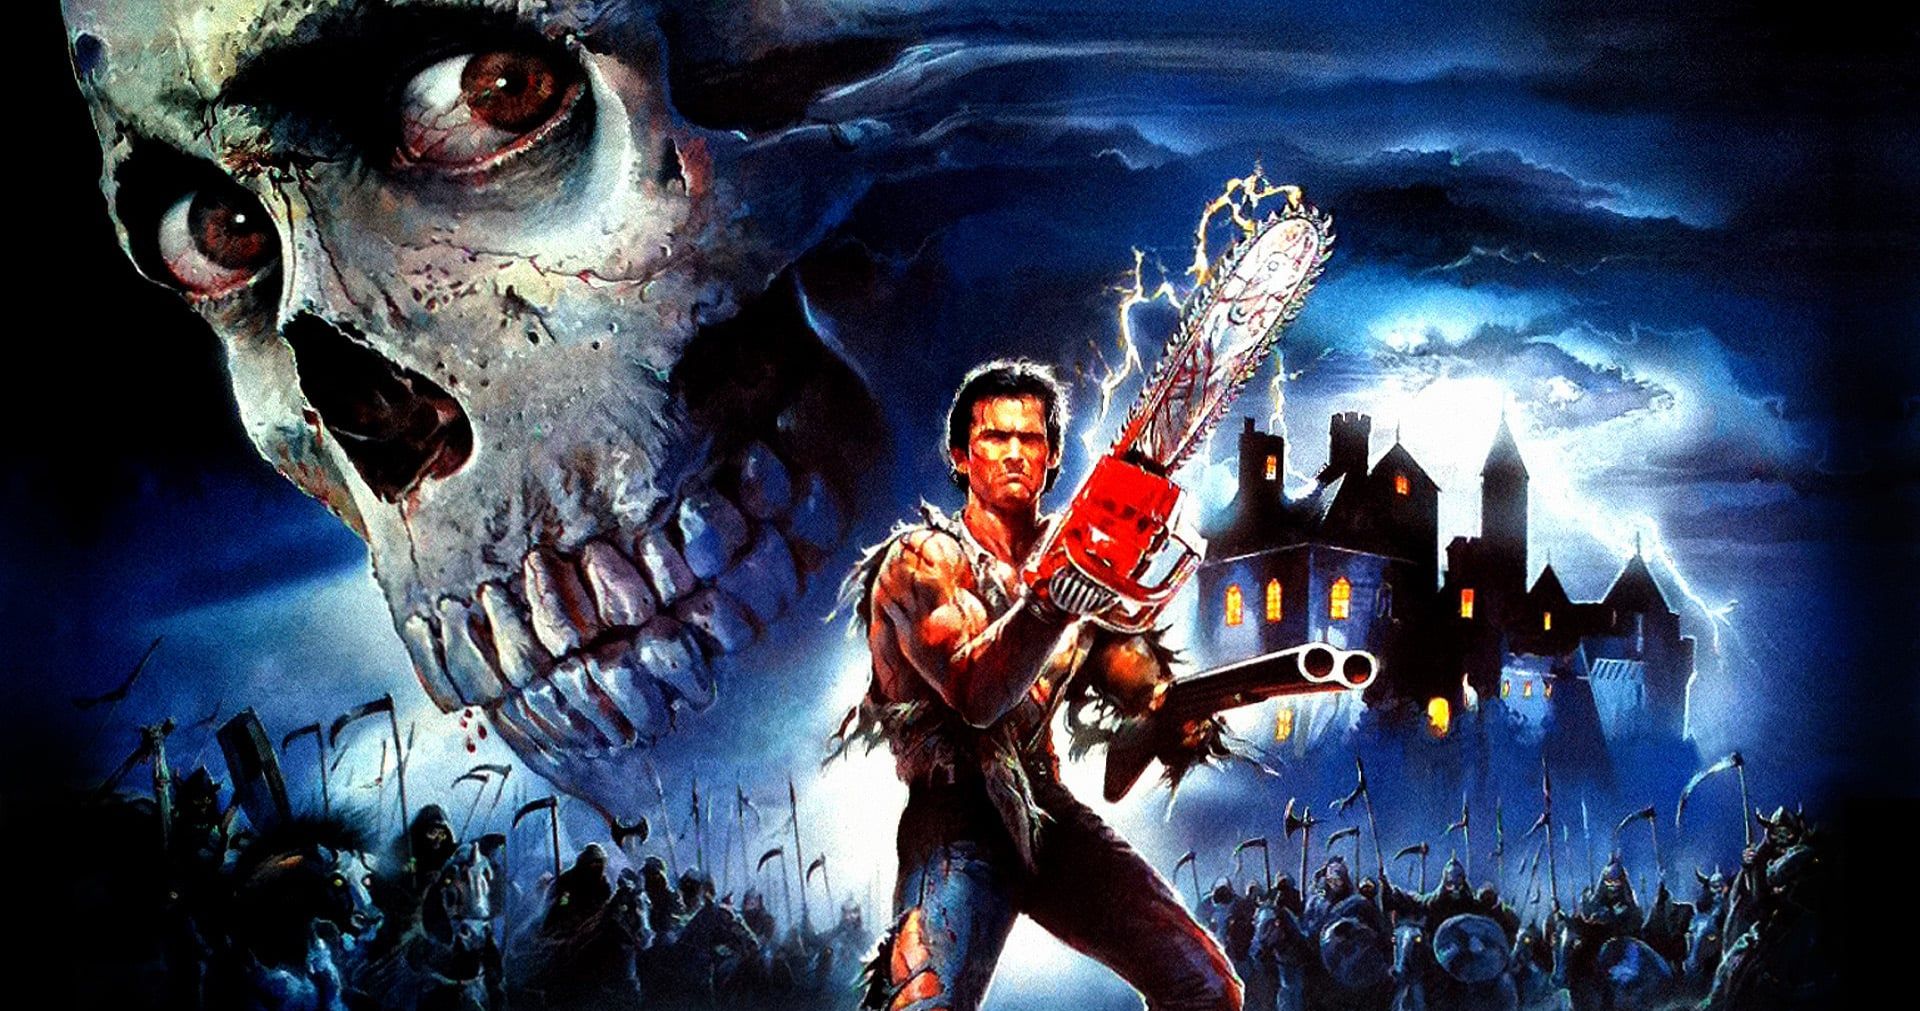 Army of Darkness Gets a New Vinyl &amp; CD Soundtrack Release from Var&#232se Sarabande Records